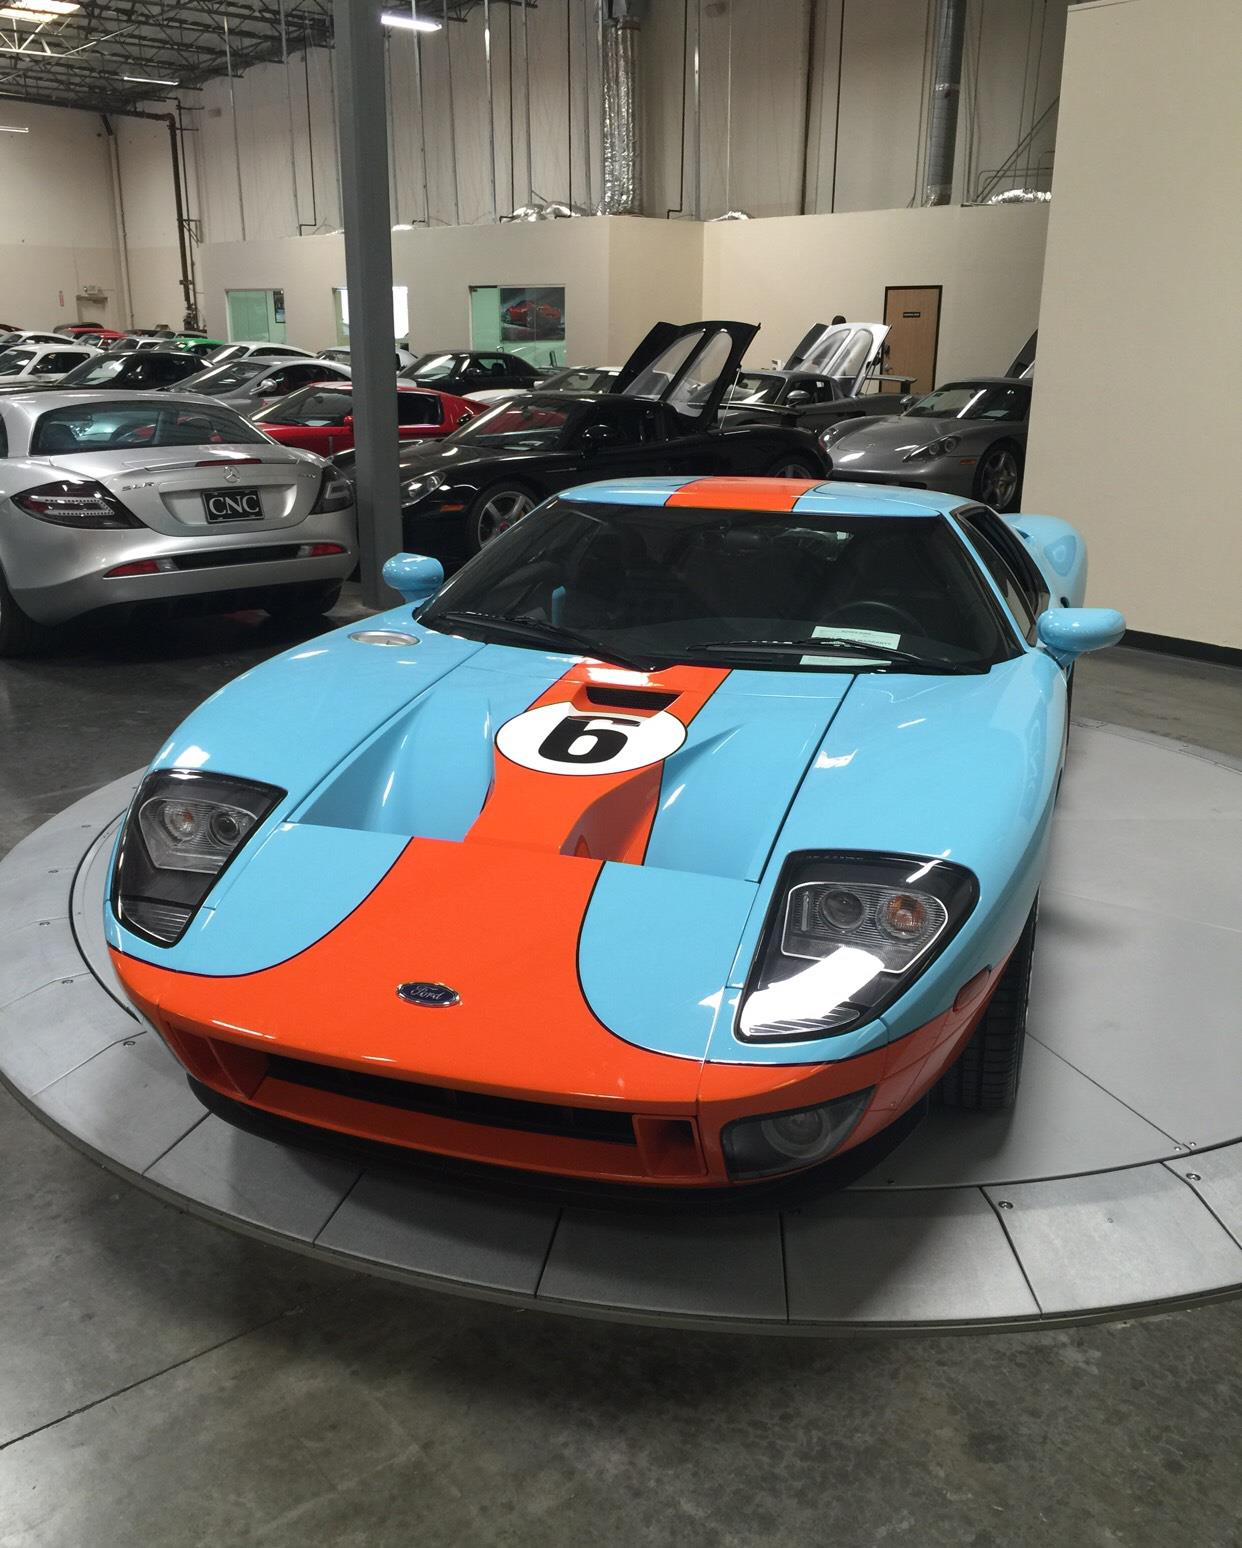 #ford #fordgt #cncmotors #forsale